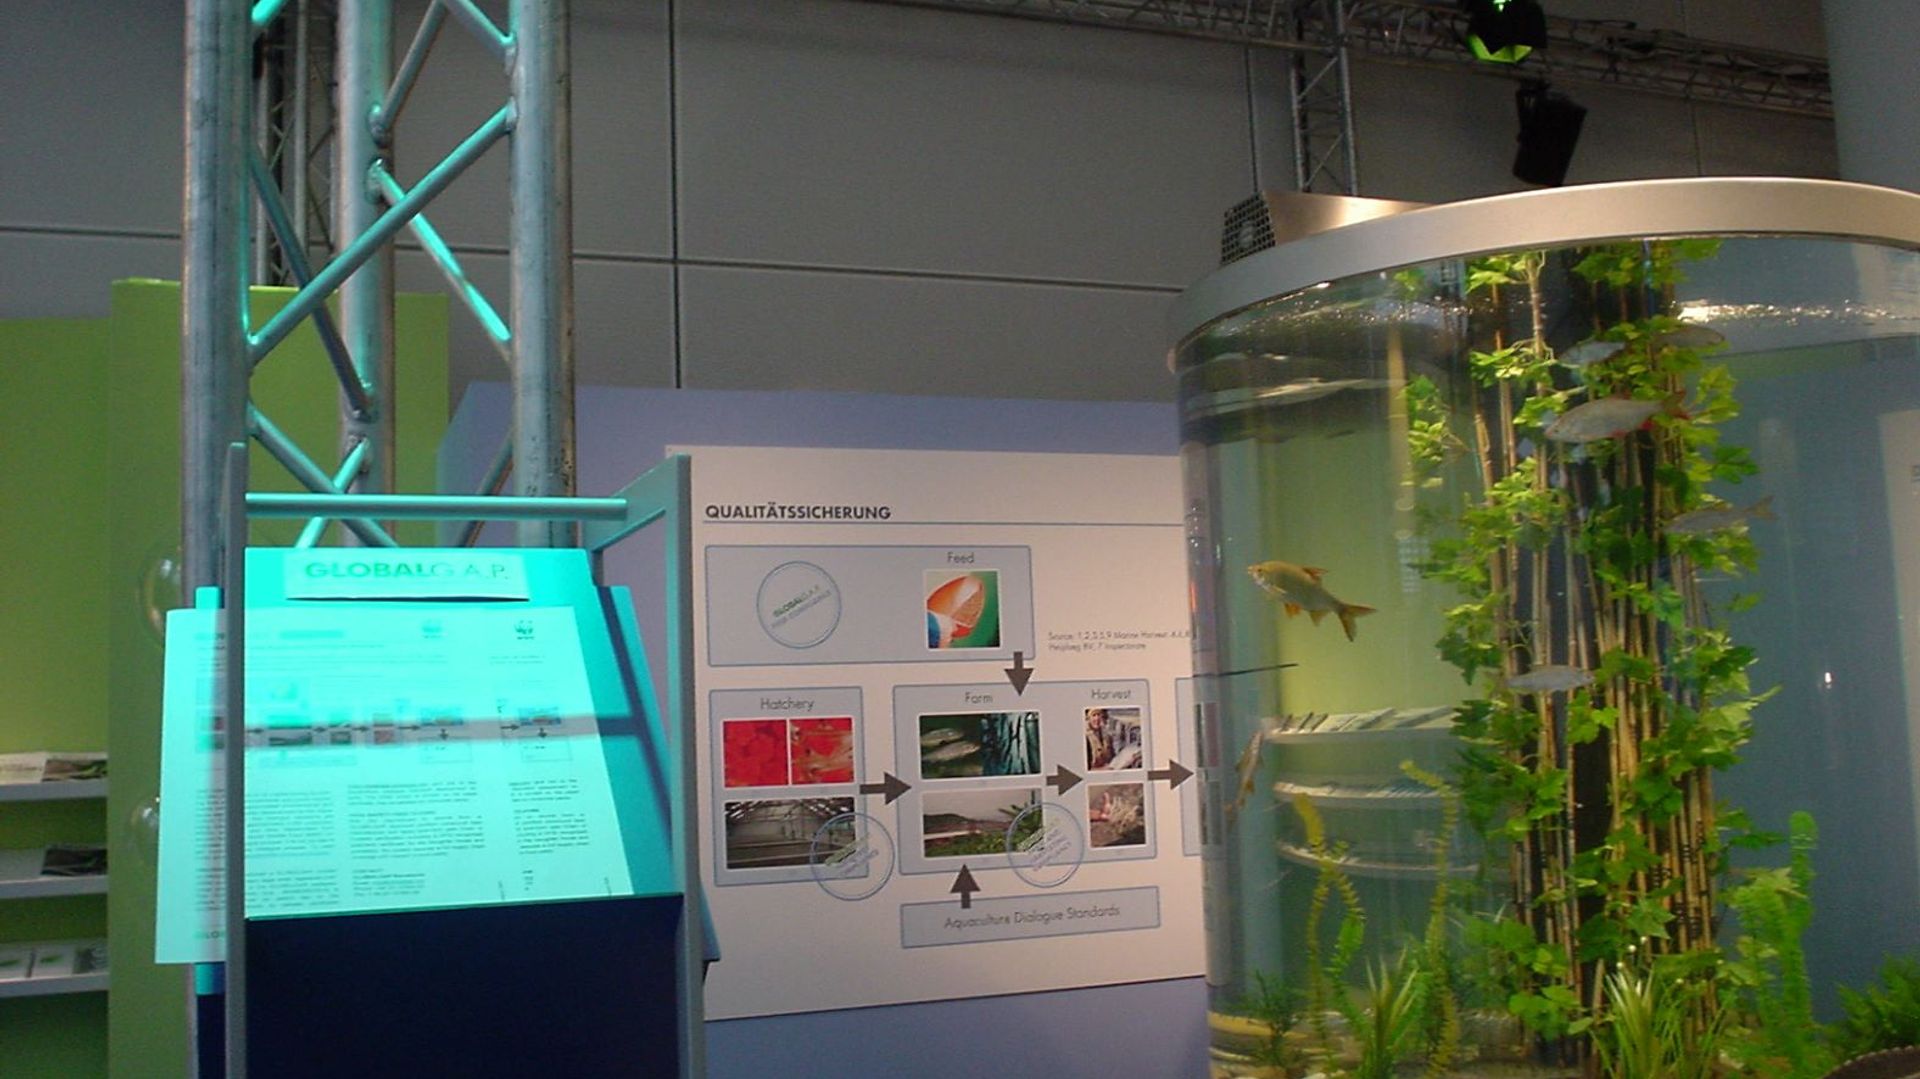 Photo of information shared on the aquaculture standard at the Amsterdam conference in 2004.